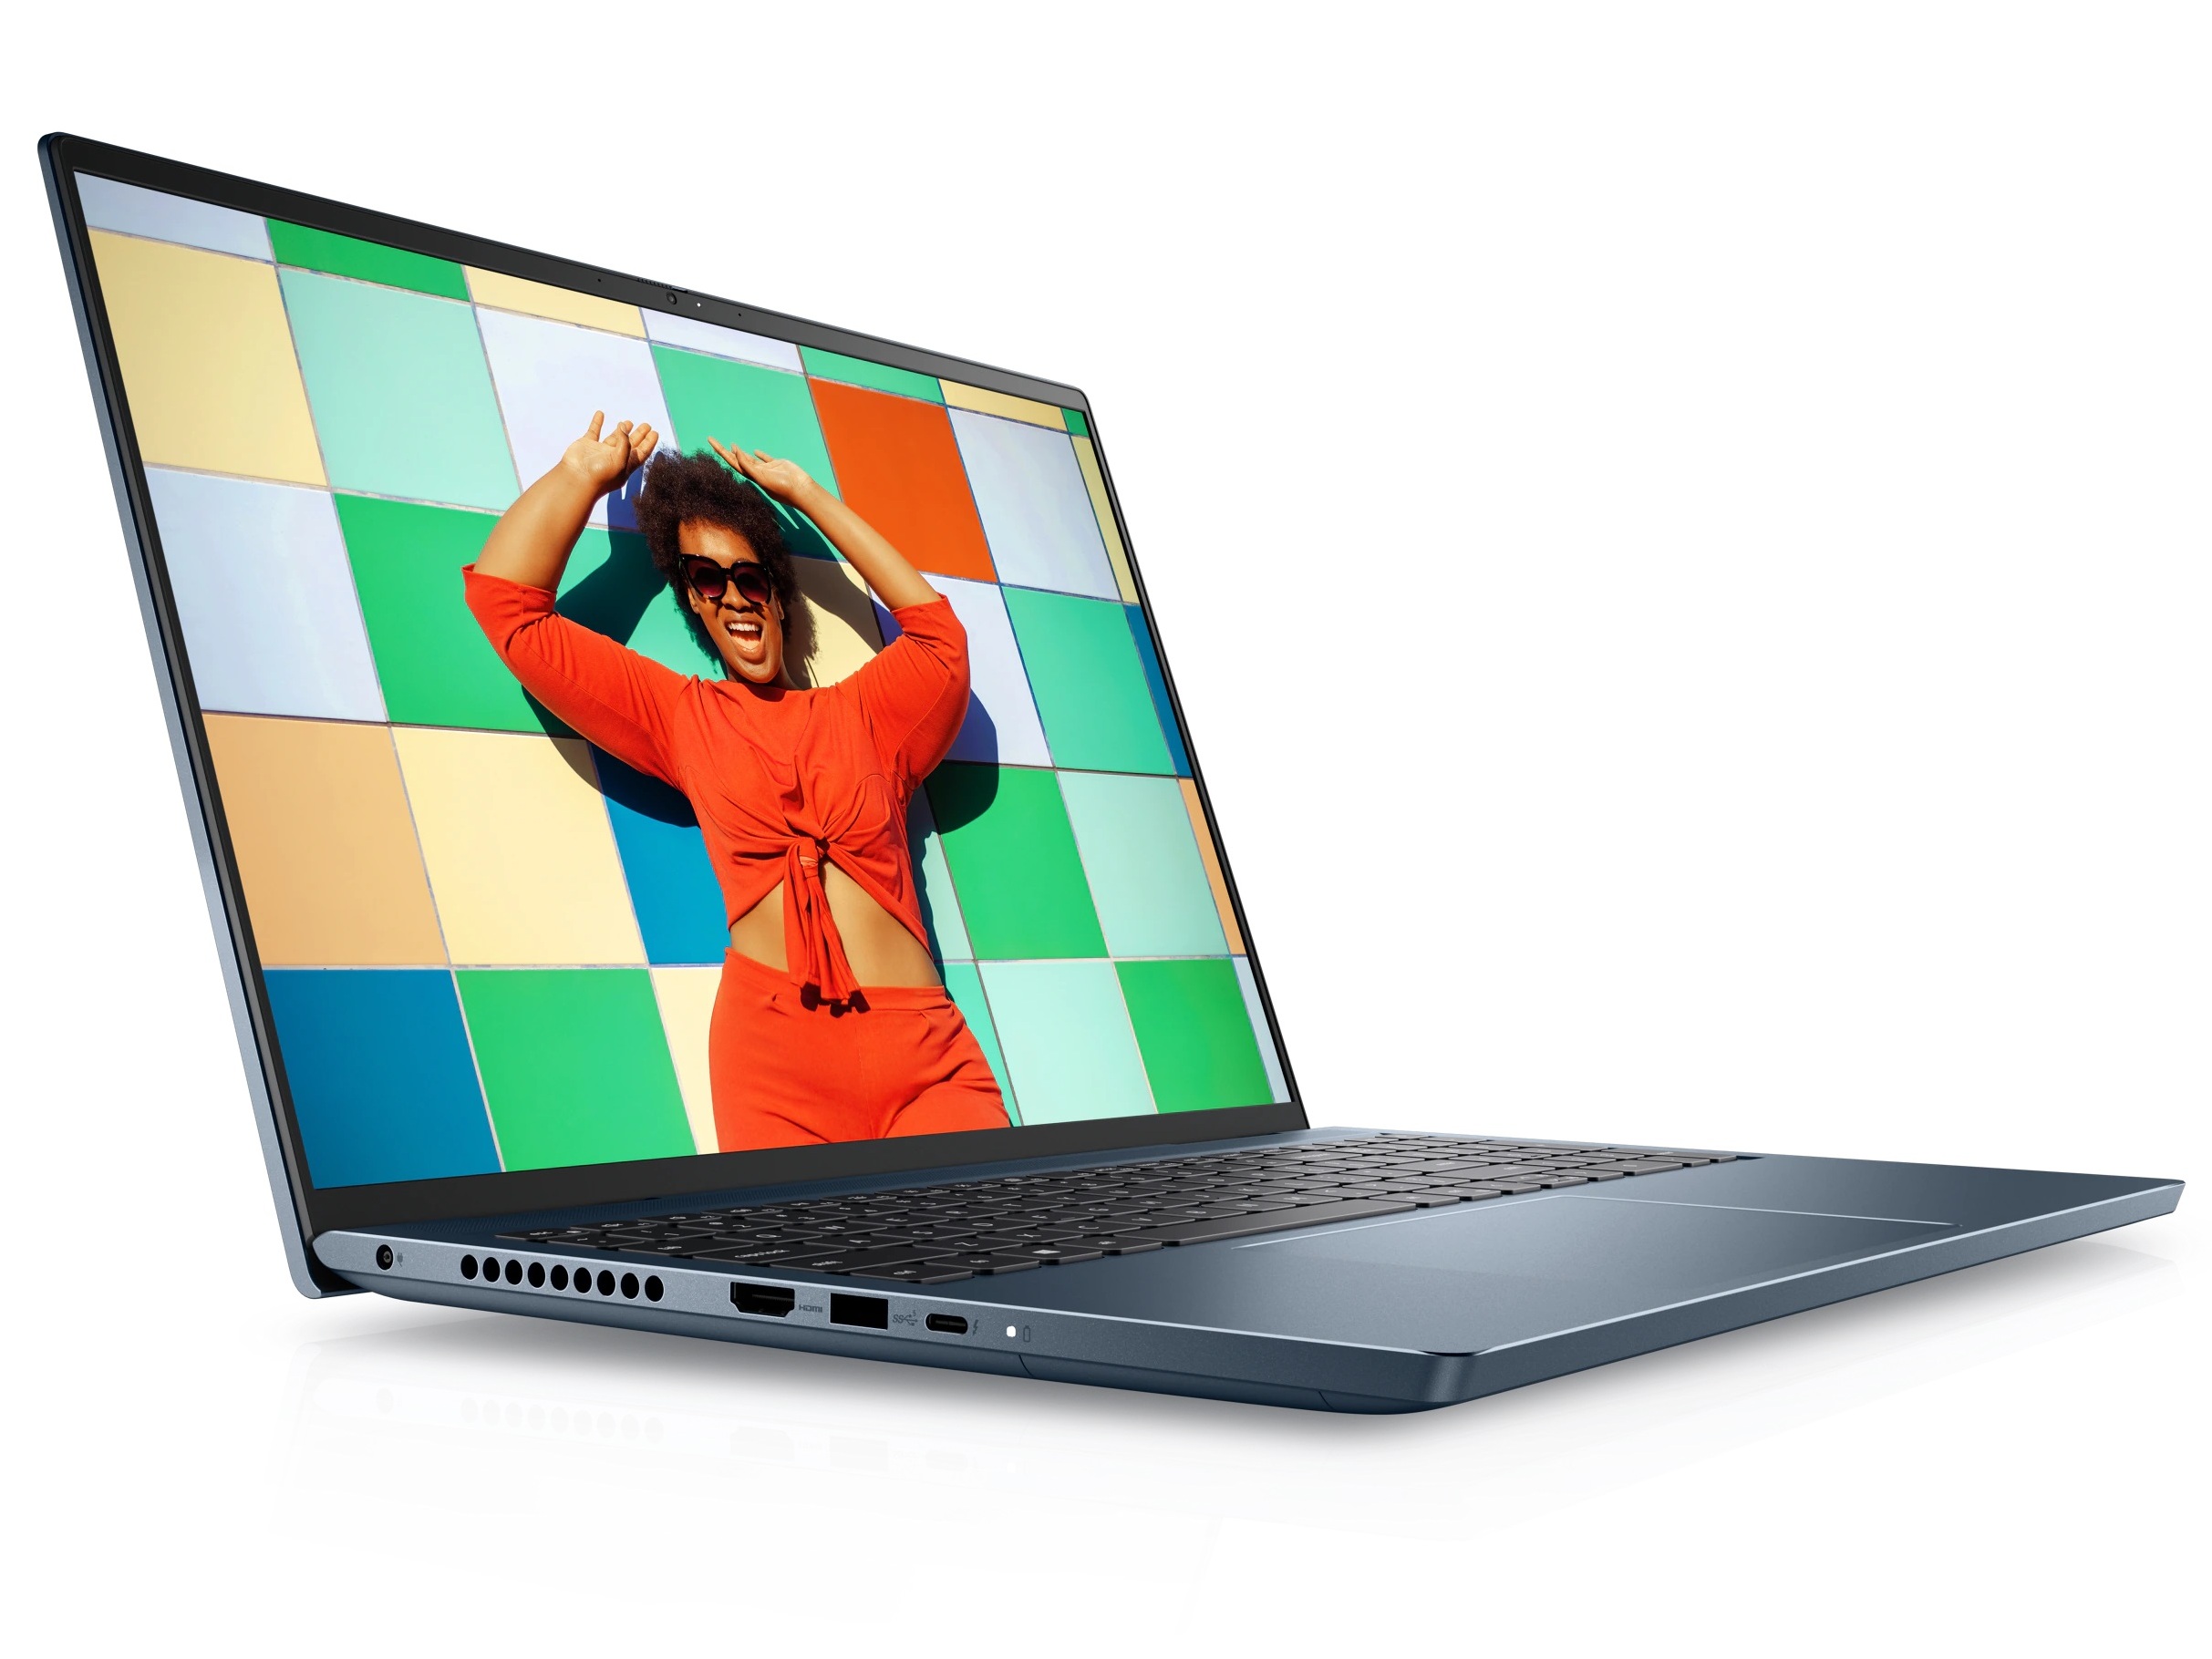 Fully loaded Dell Inspiron 16 Plus with Core i7-11800H, 3K display, and  GeForce RTX 3060 graphics on sale for $1460 USD  News